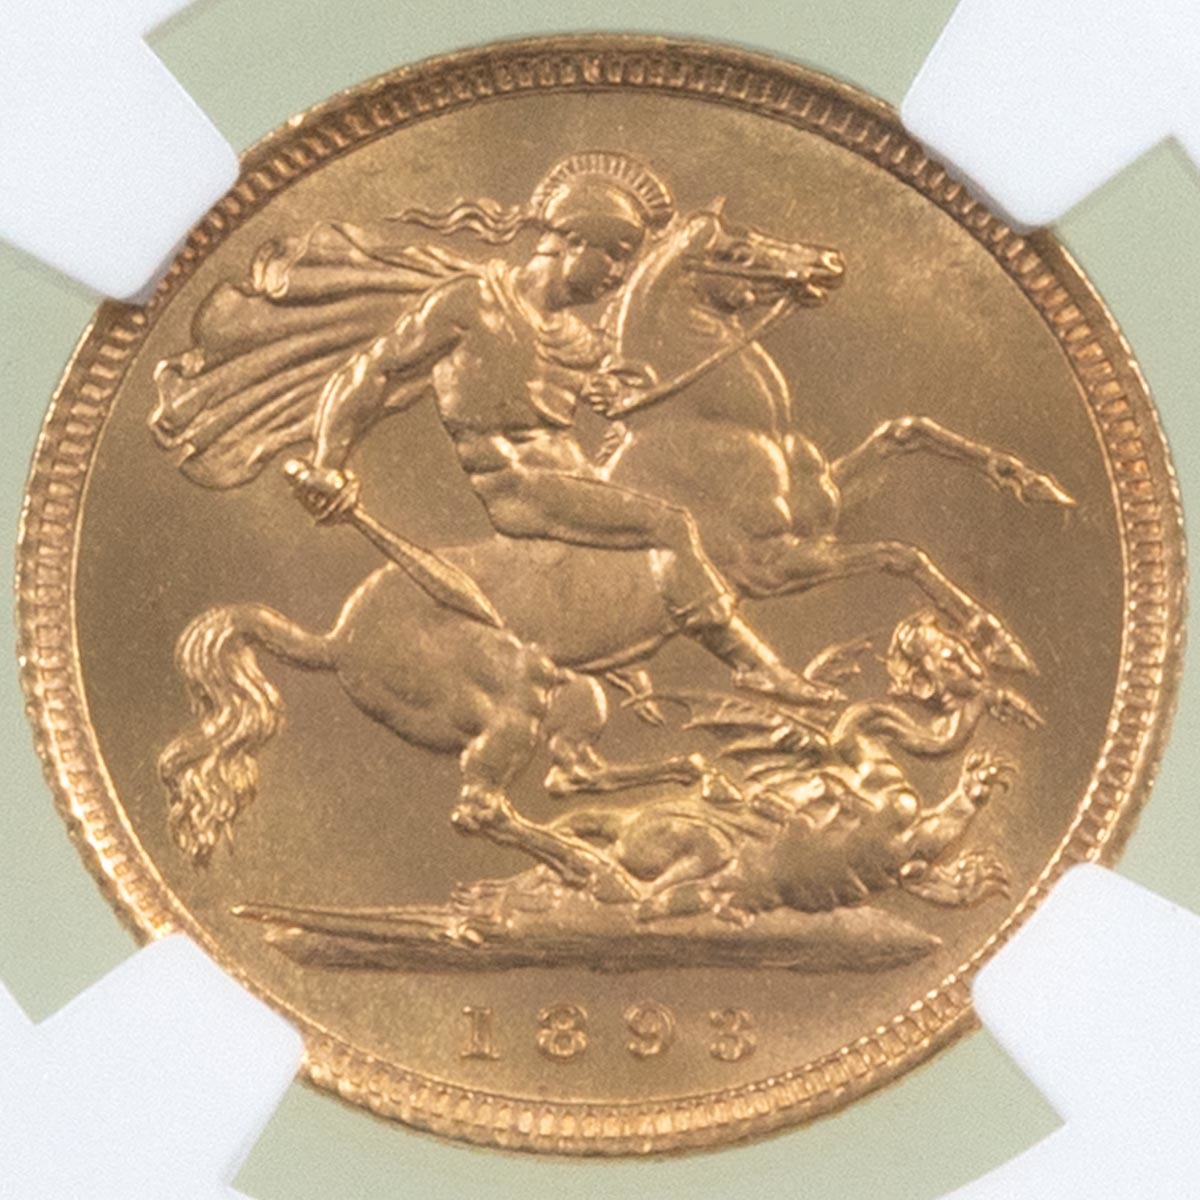 1893 Queen Victoria Gold Half Sovereign London Mint Jubilee Head NGC Graded MS 62 Reverse